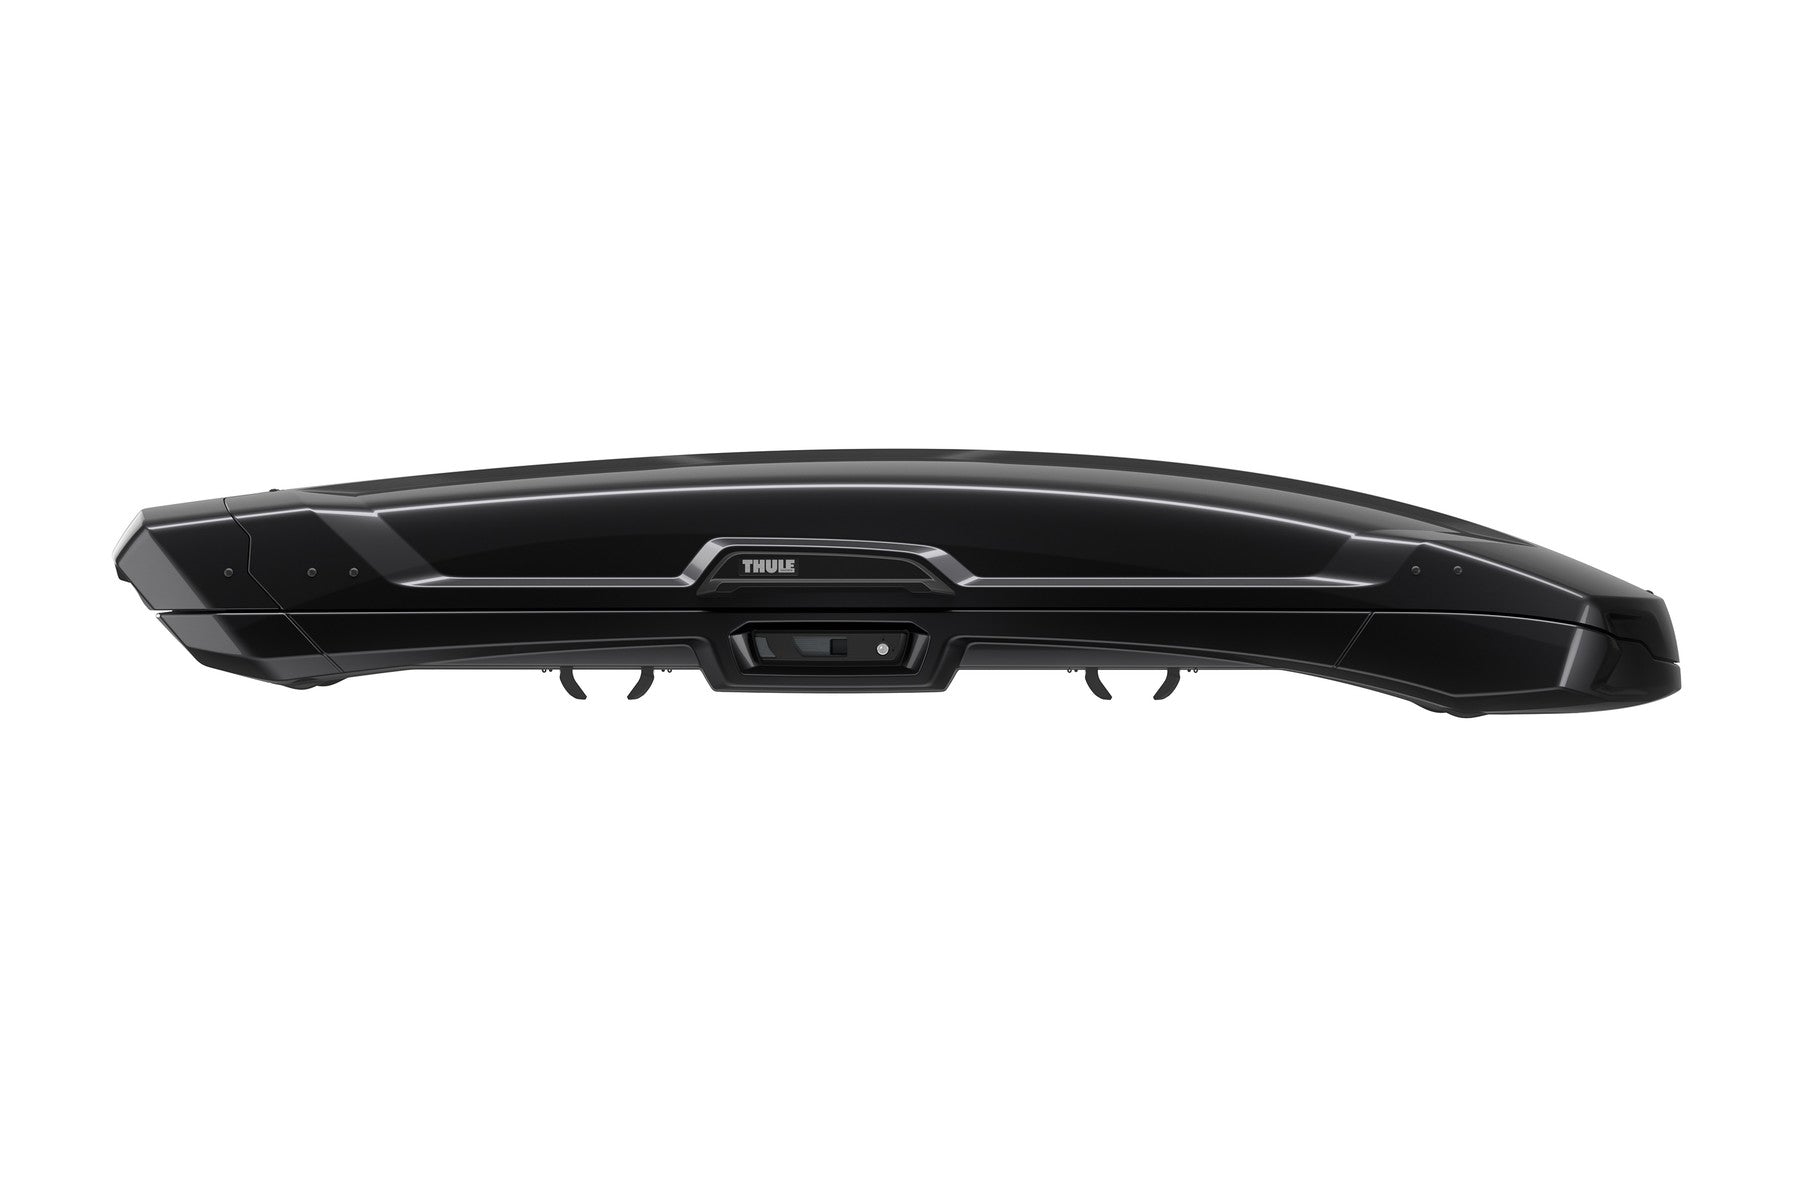 Thule Vector Alpine Rooftop Cargo Carrier Side View